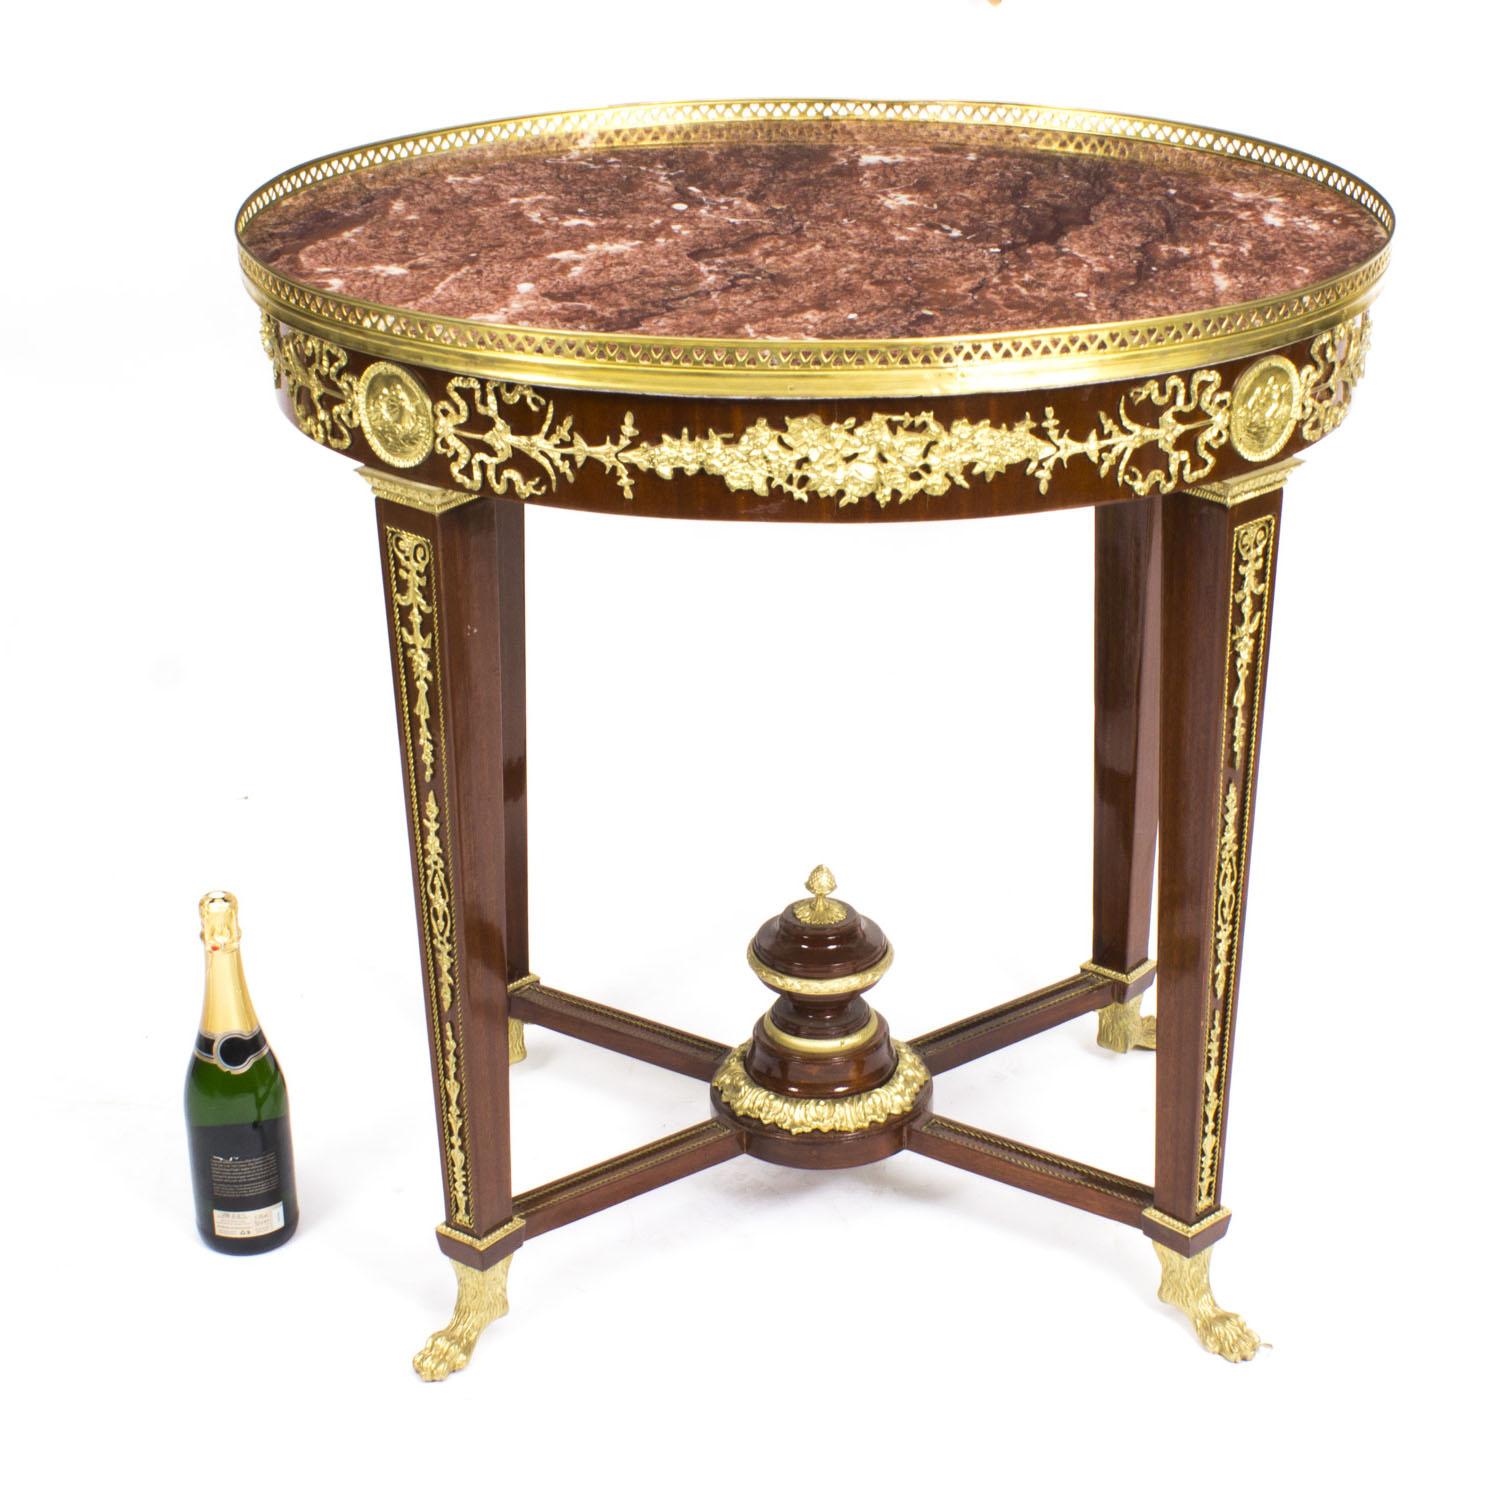 Vintage Empire Revival Marble Top Ormolu Mounted Occasional Table 20th C For Sale 11